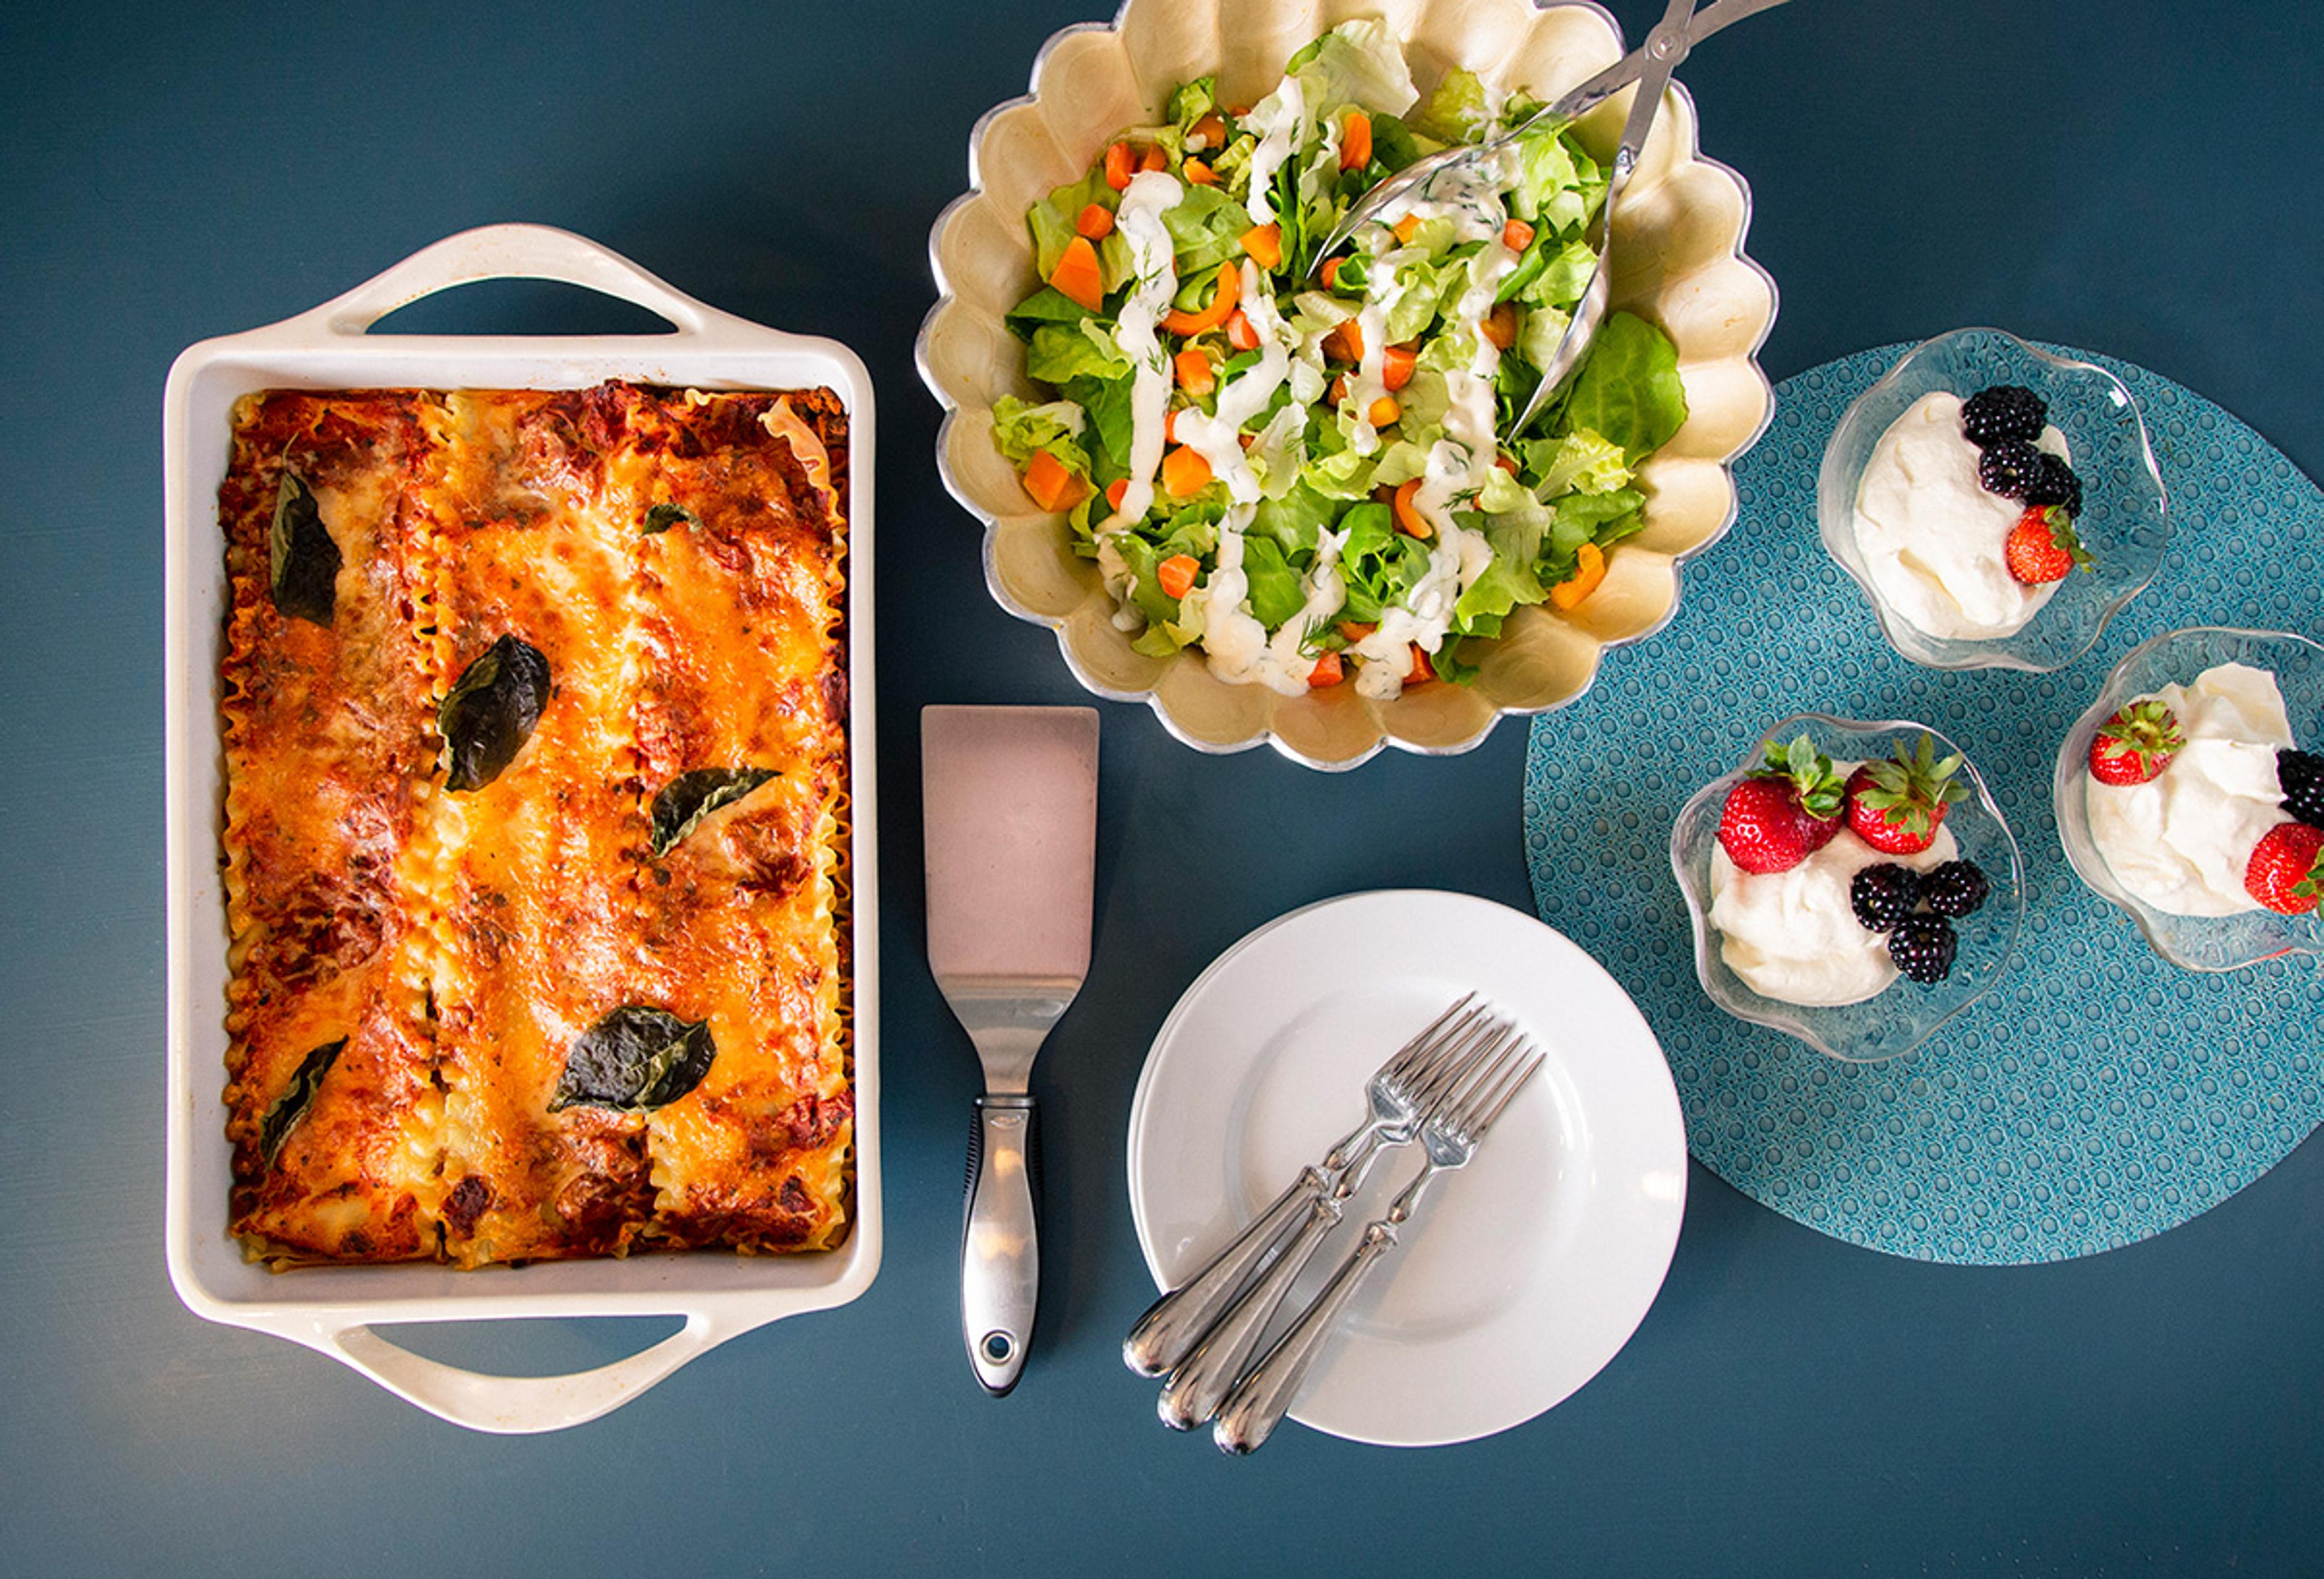 A pan of lasagna, salad, and dishes of fruit with whipped cream arranged around plates and forks on a blue table.